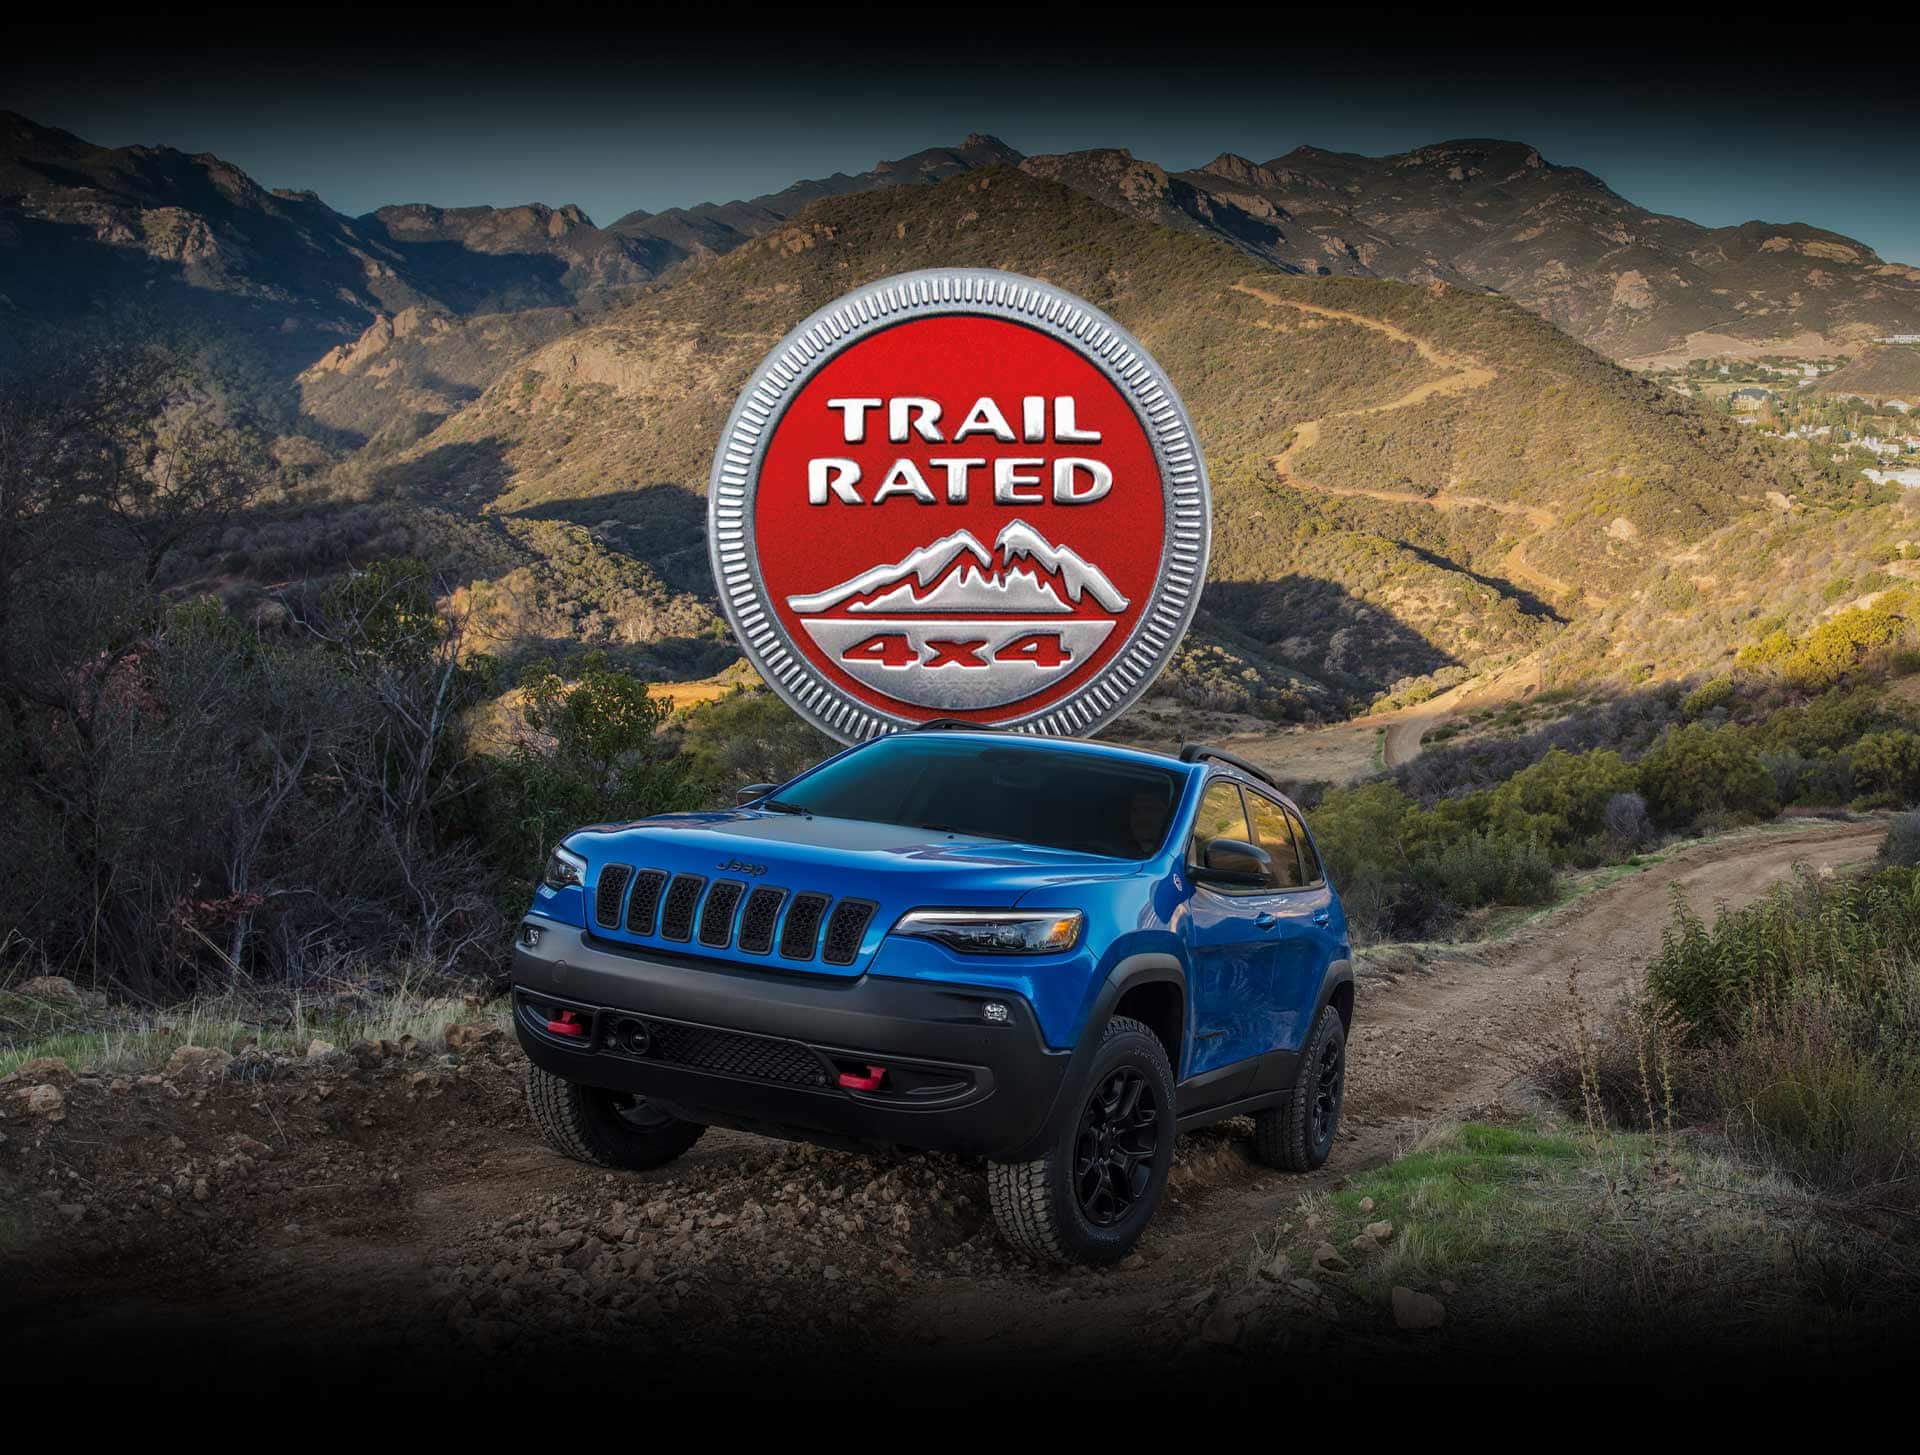 Trail Rated 4x4. The 2022 Jeep Cherokee Trailhawk being driven off-road on a dirt trail in the mountains.